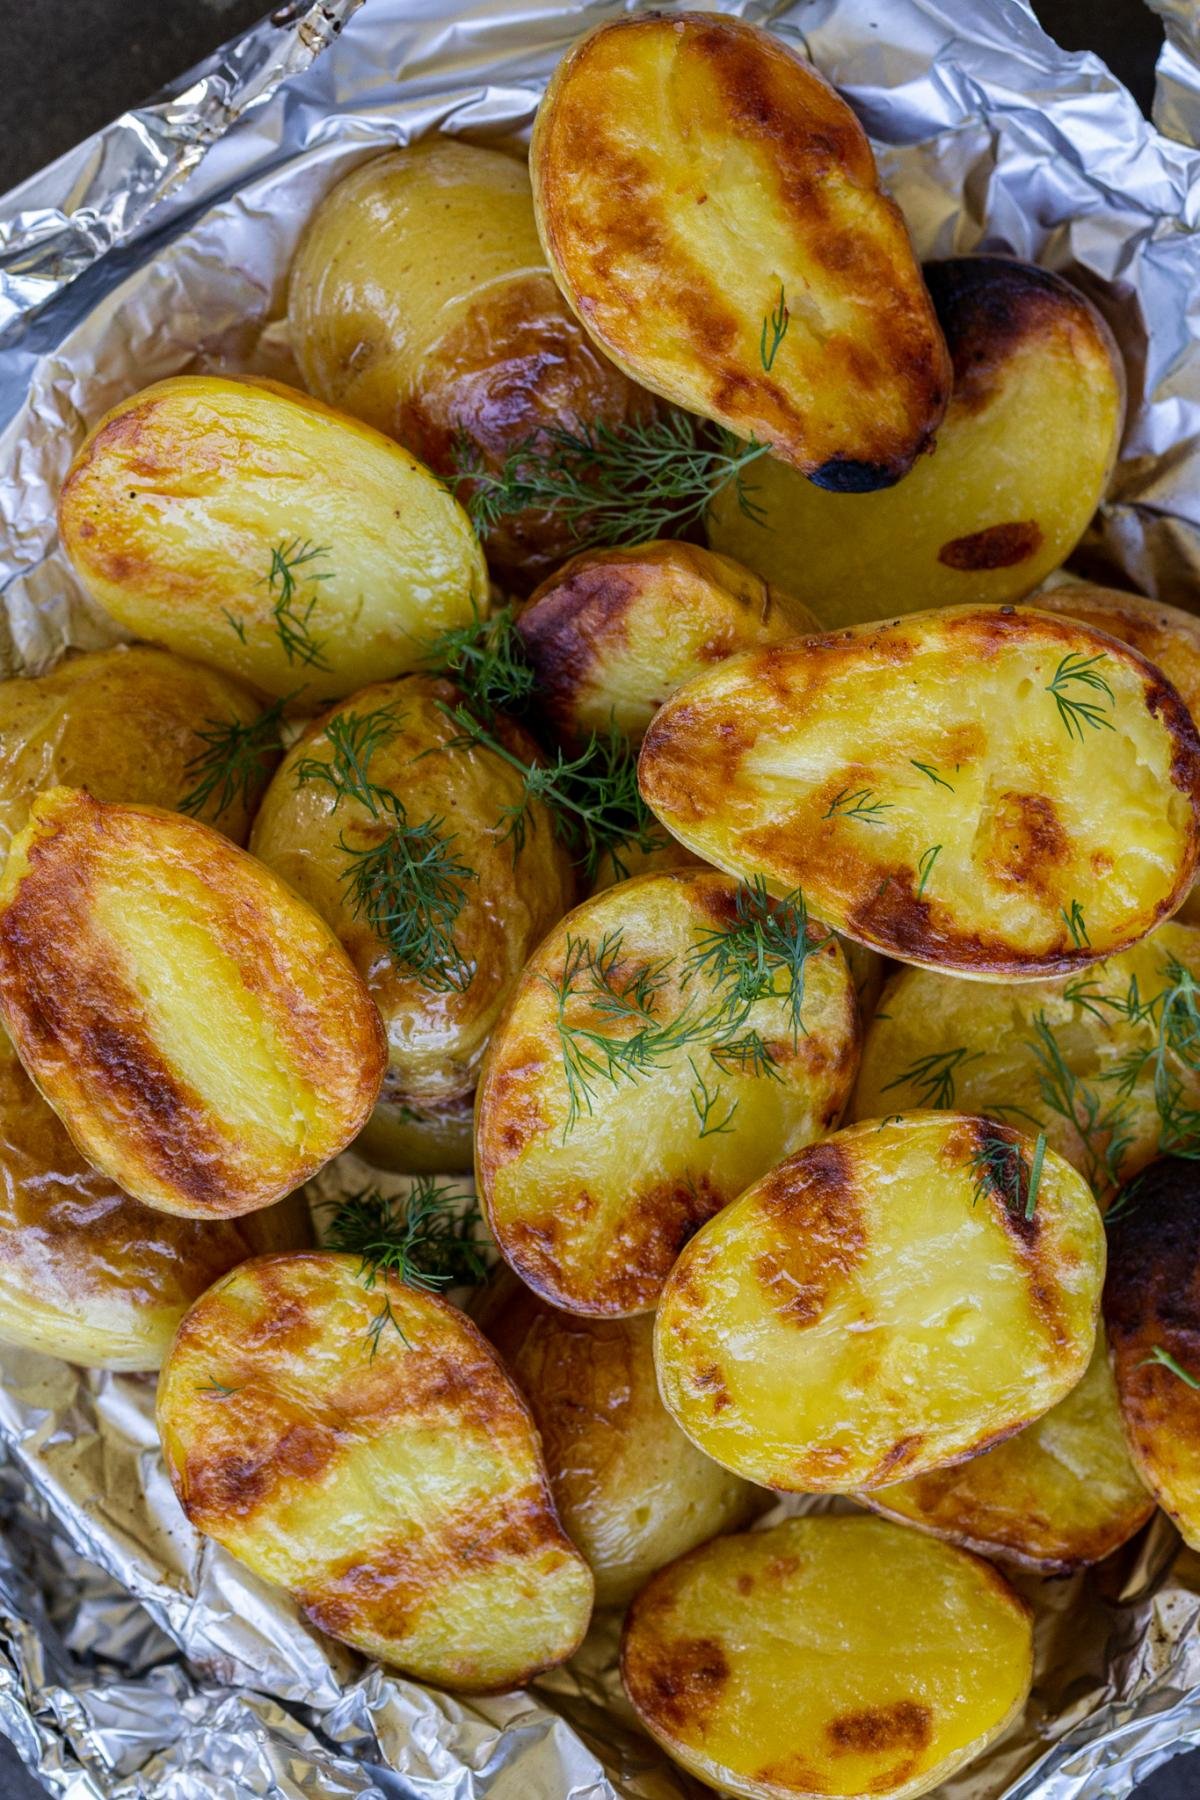 Grilled Potatoes - Easy Crispy Red Potatoes in Foil Packets